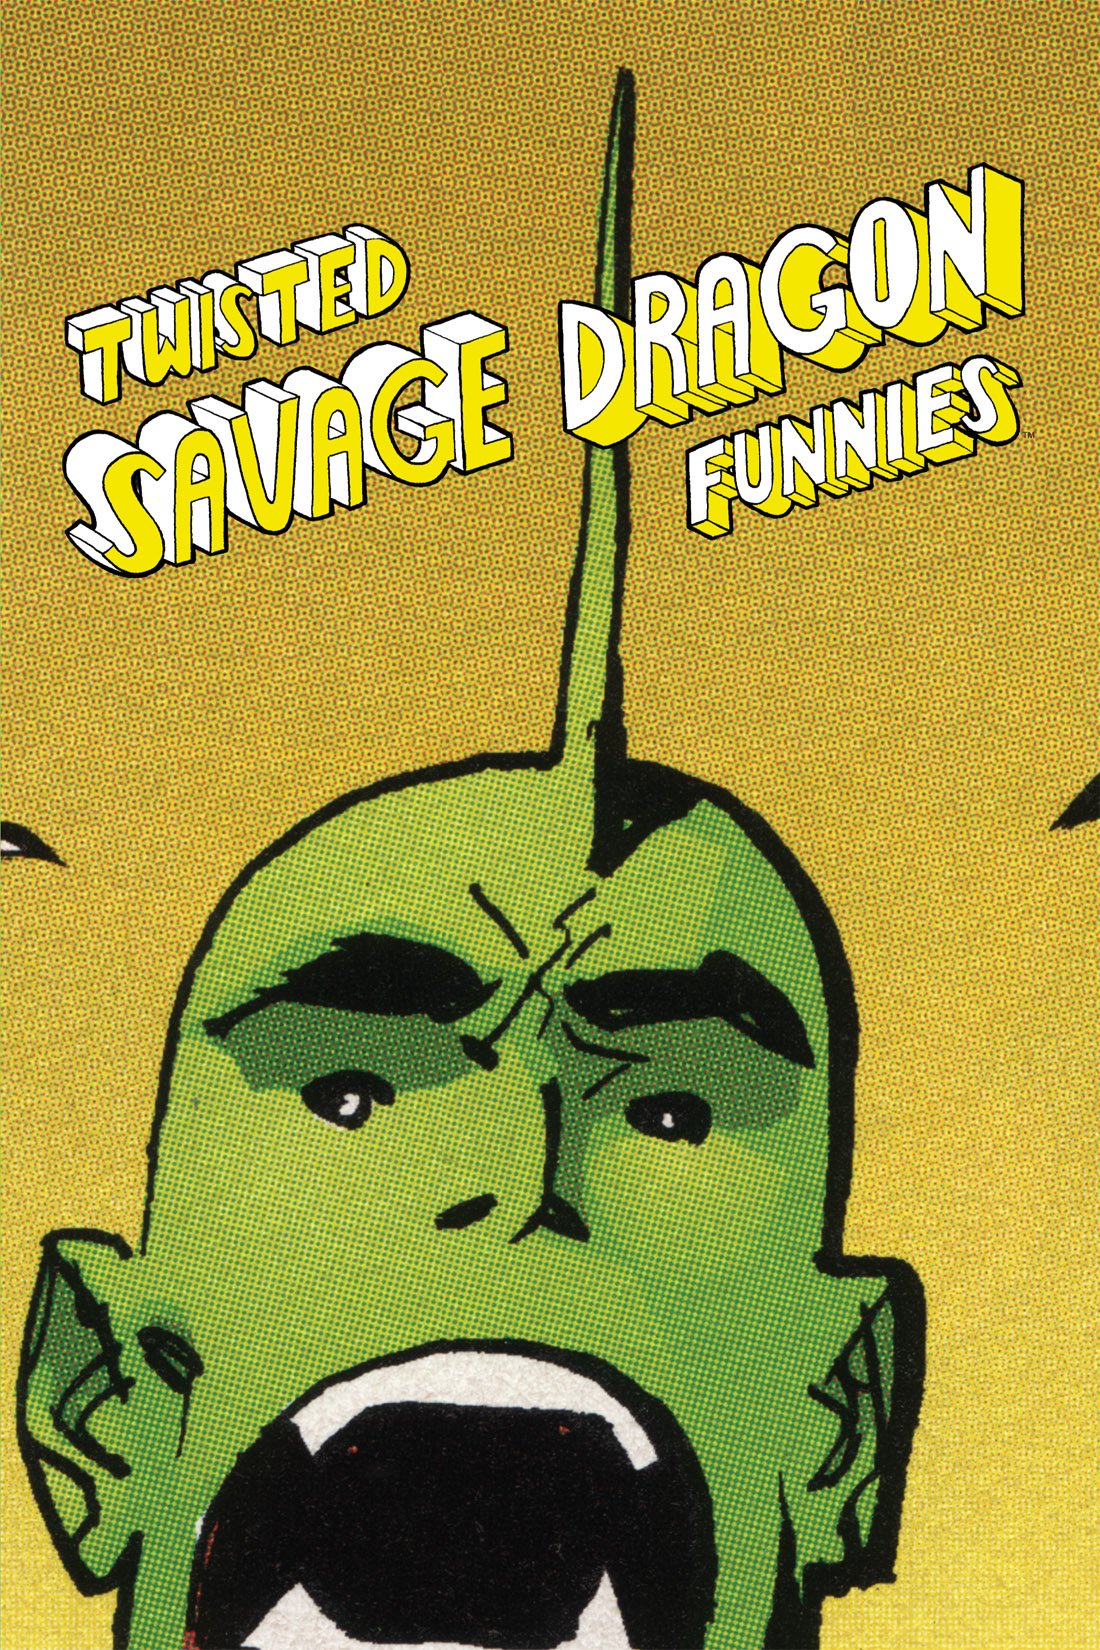 Read online Twisted Savage Dragon Funnies comic -  Issue # TPB - 1